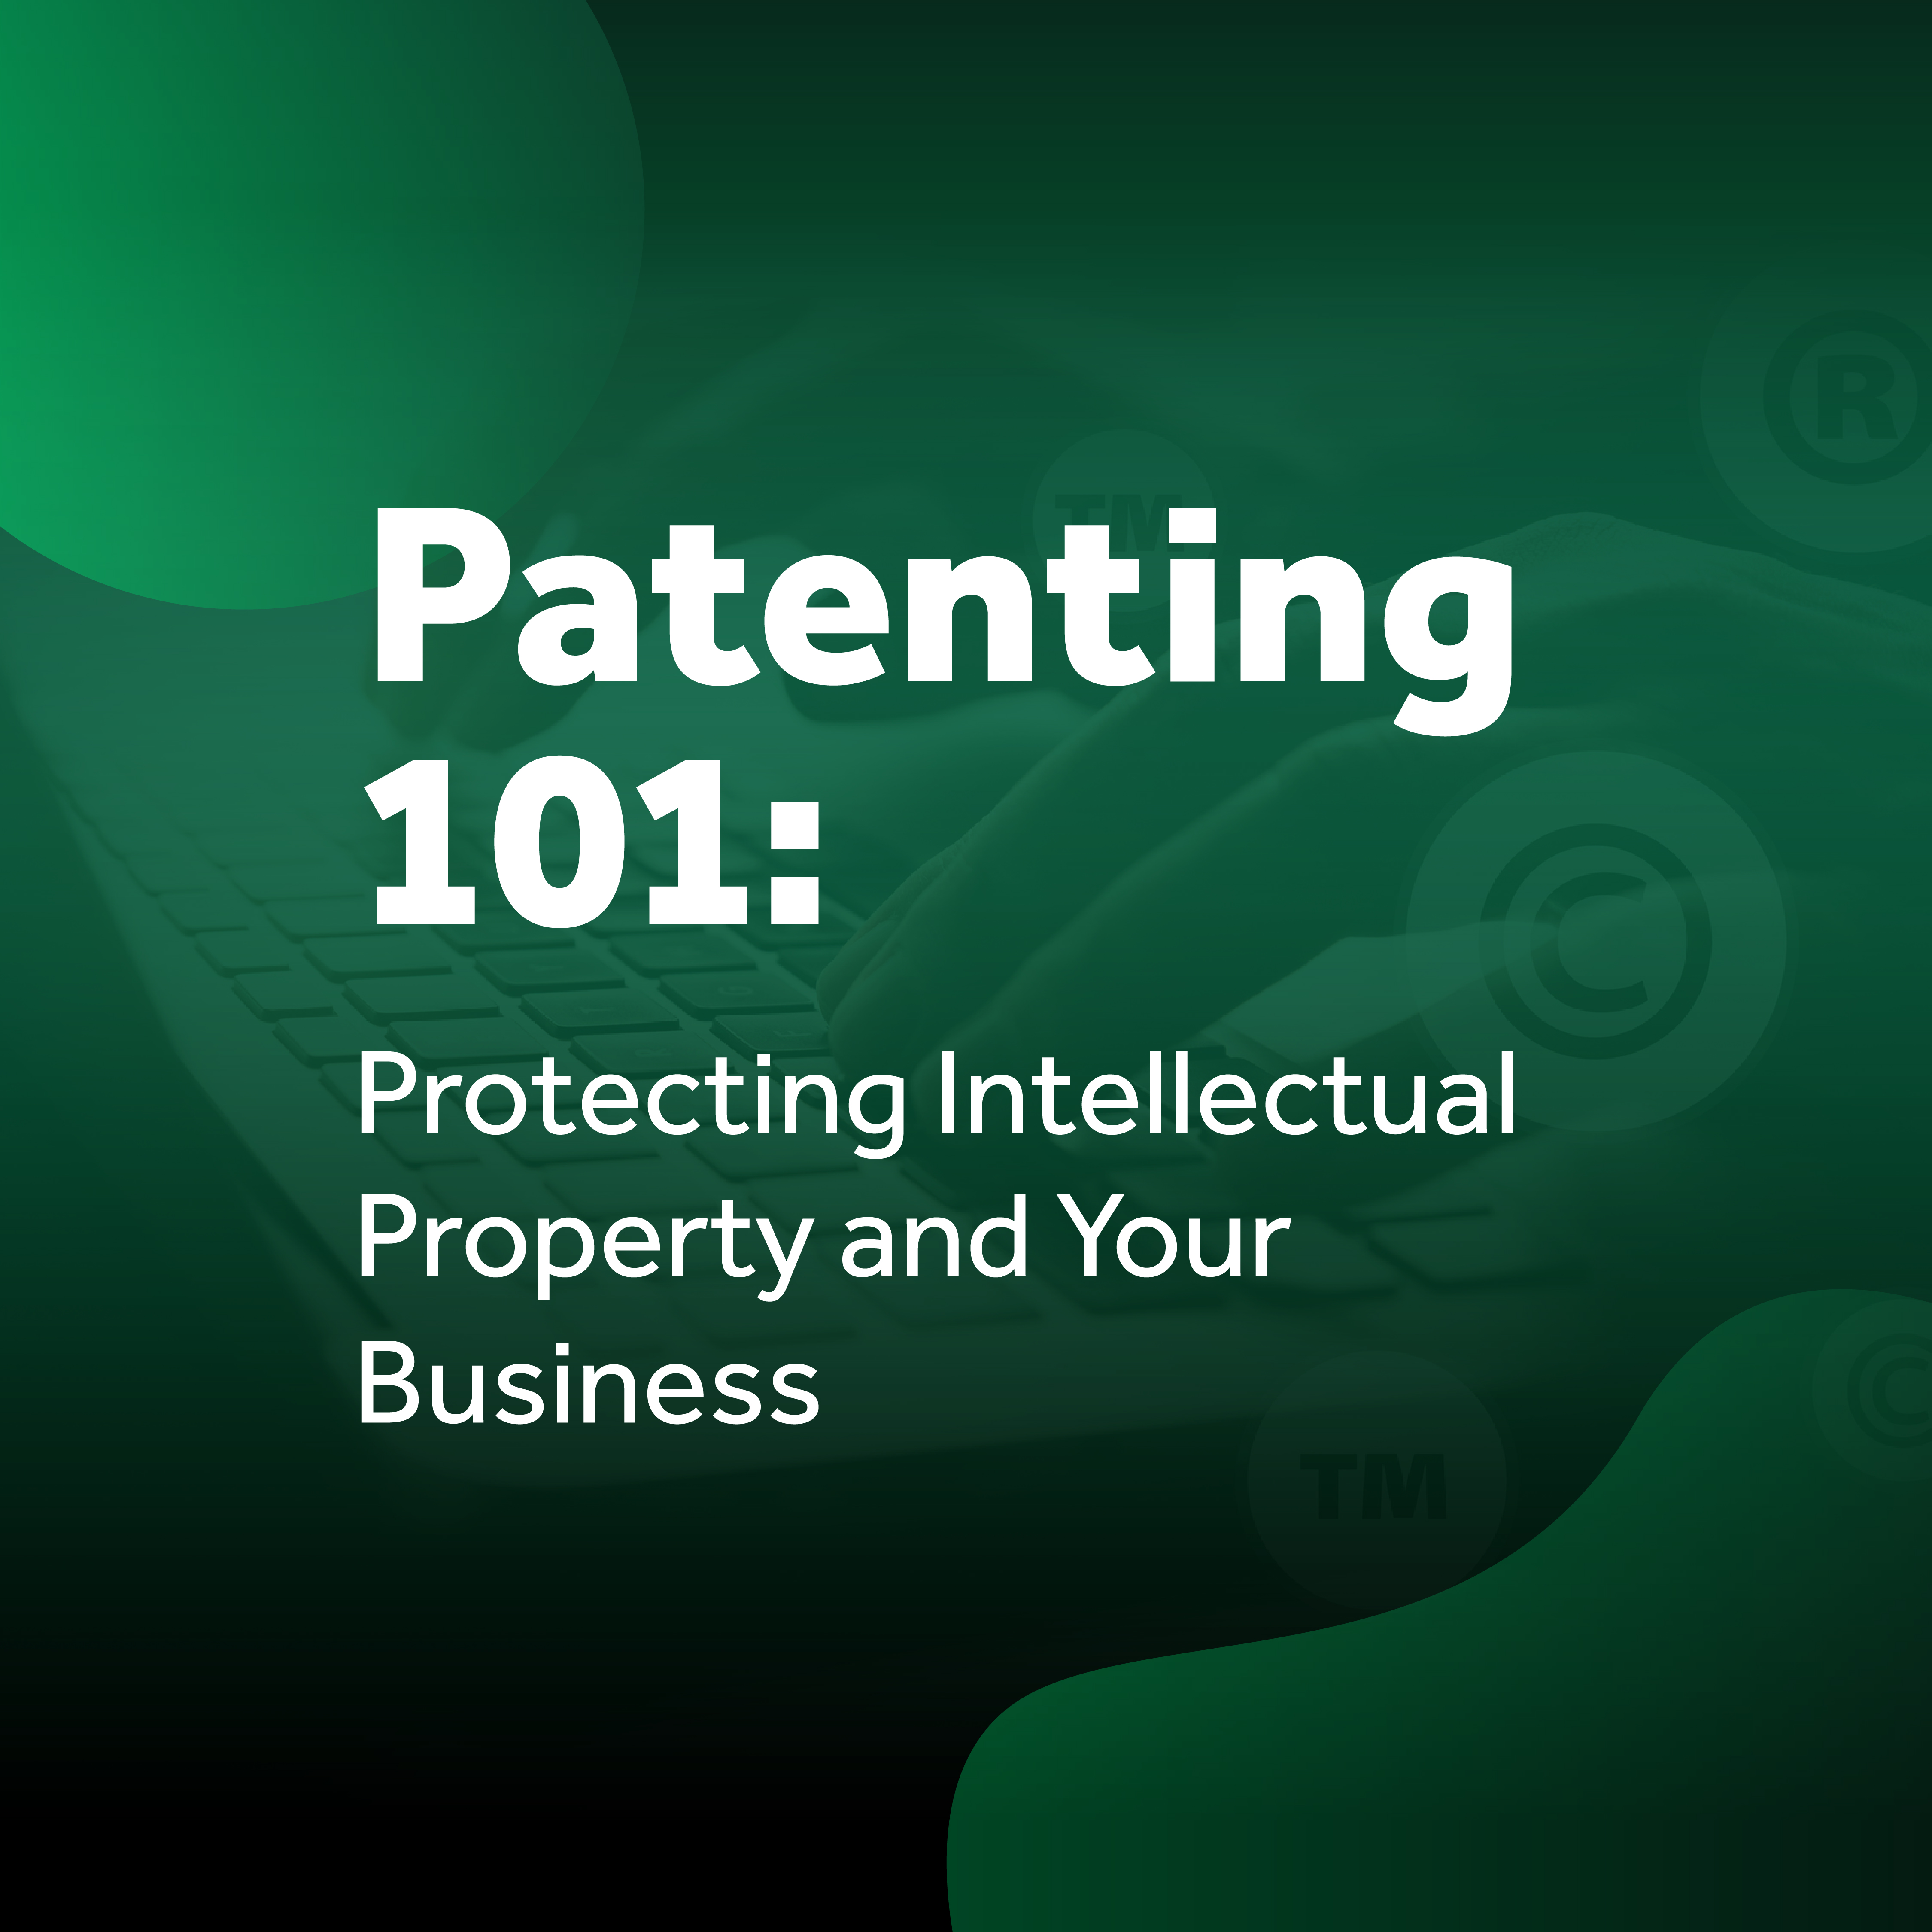 Patenting 101: Protecting Intellectual Property and Your Business